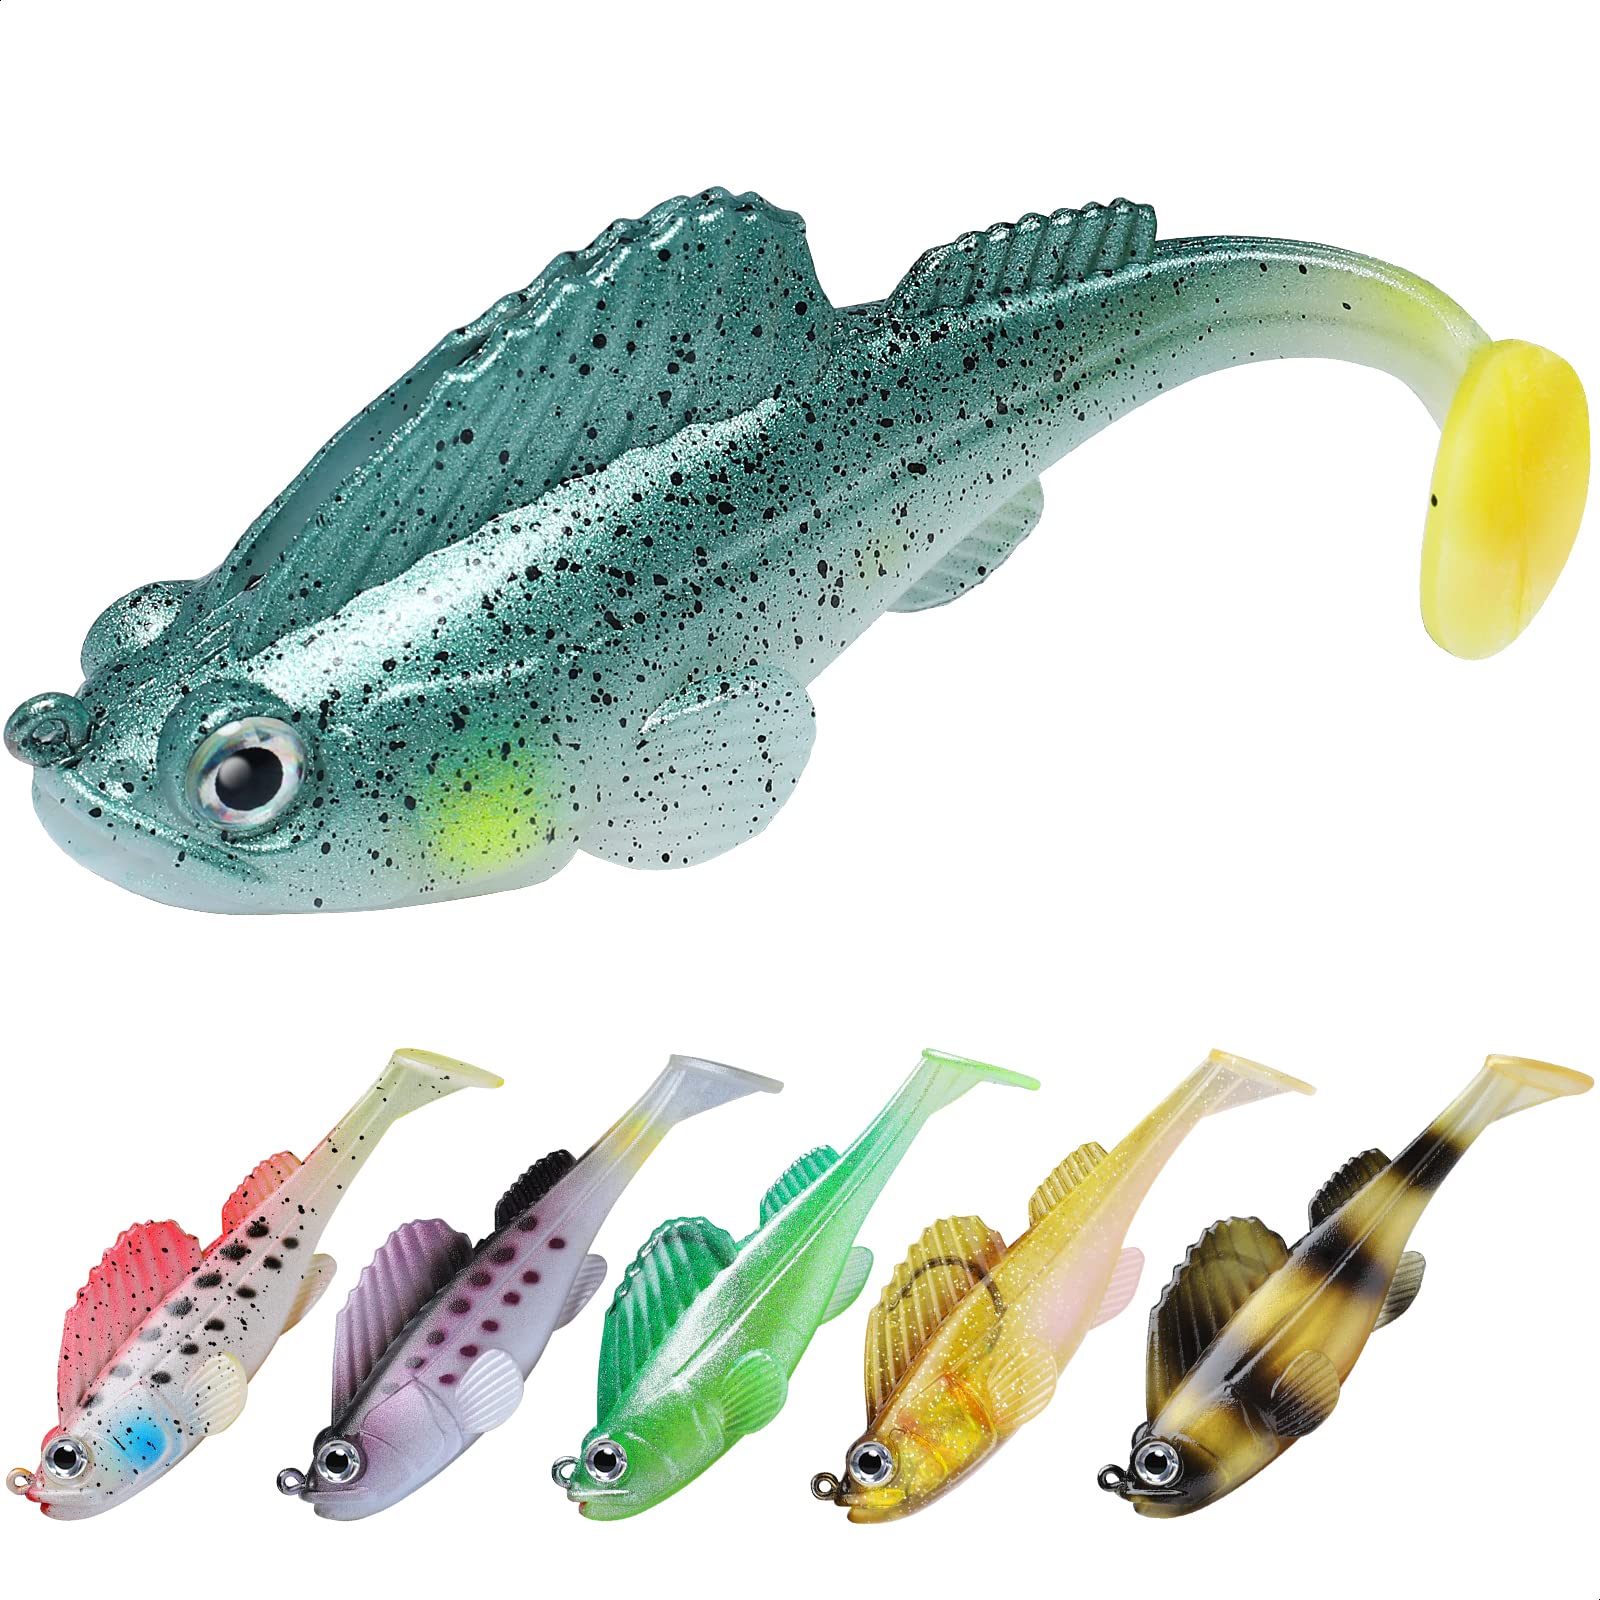 TRUSCEND Swinging Jigs Fishing Lures with Teflon Coated Ultra Smooth Sharp  BKK Hook, Multi-Color Skirted Bass Swim Jigs Tied with Stainless Wire,  Weedless Bass Baits Fishing Jigs Easily Used 3/8oz : 